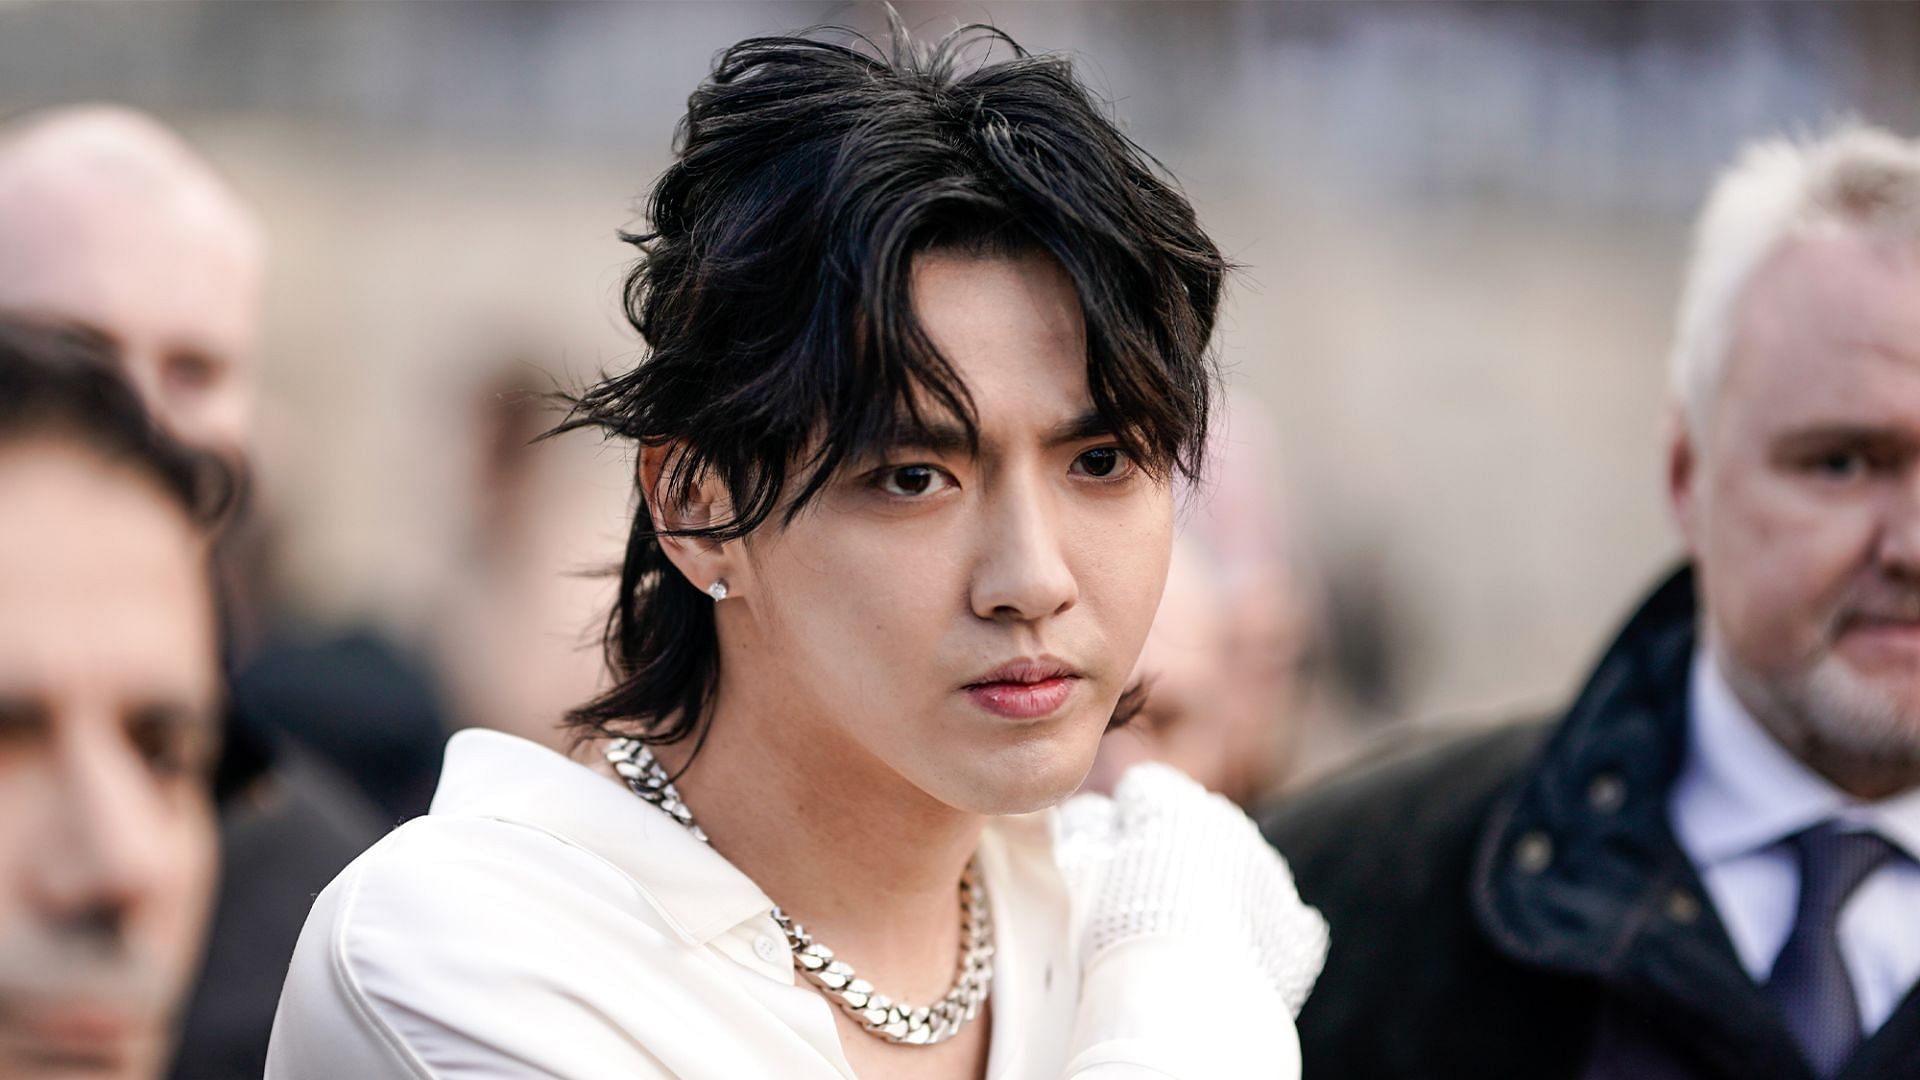 Chinese superstar Kris Wu detained on suspicion of rape